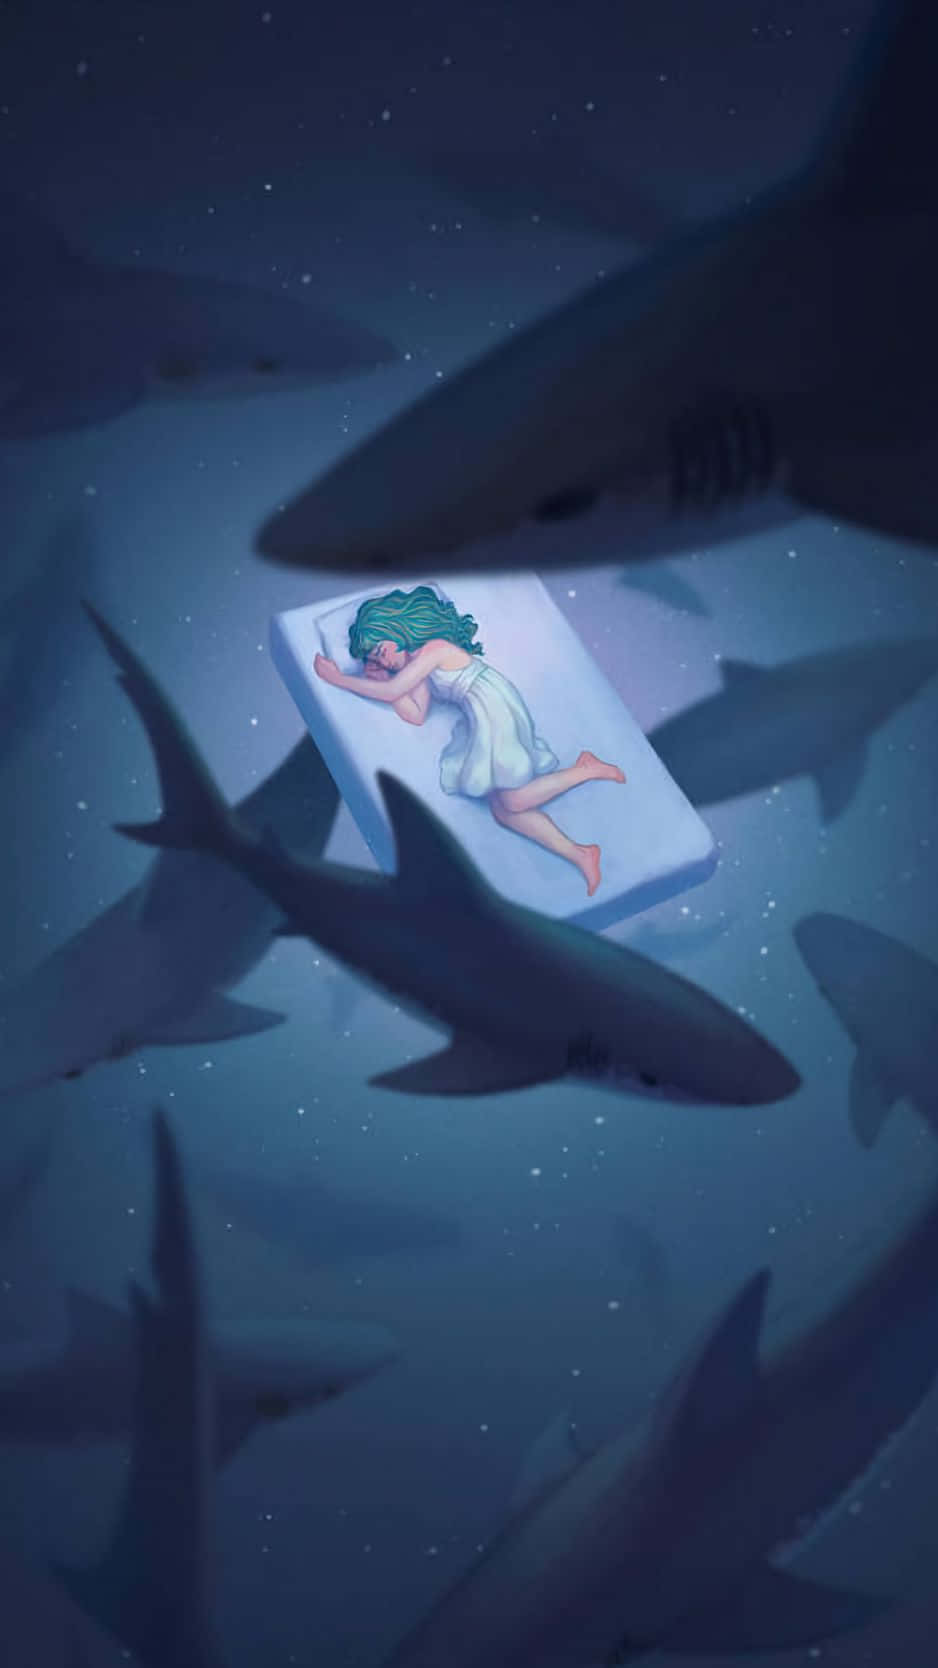 A Girl Is Sleeping In The Ocean With Sharks Around Her Wallpaper